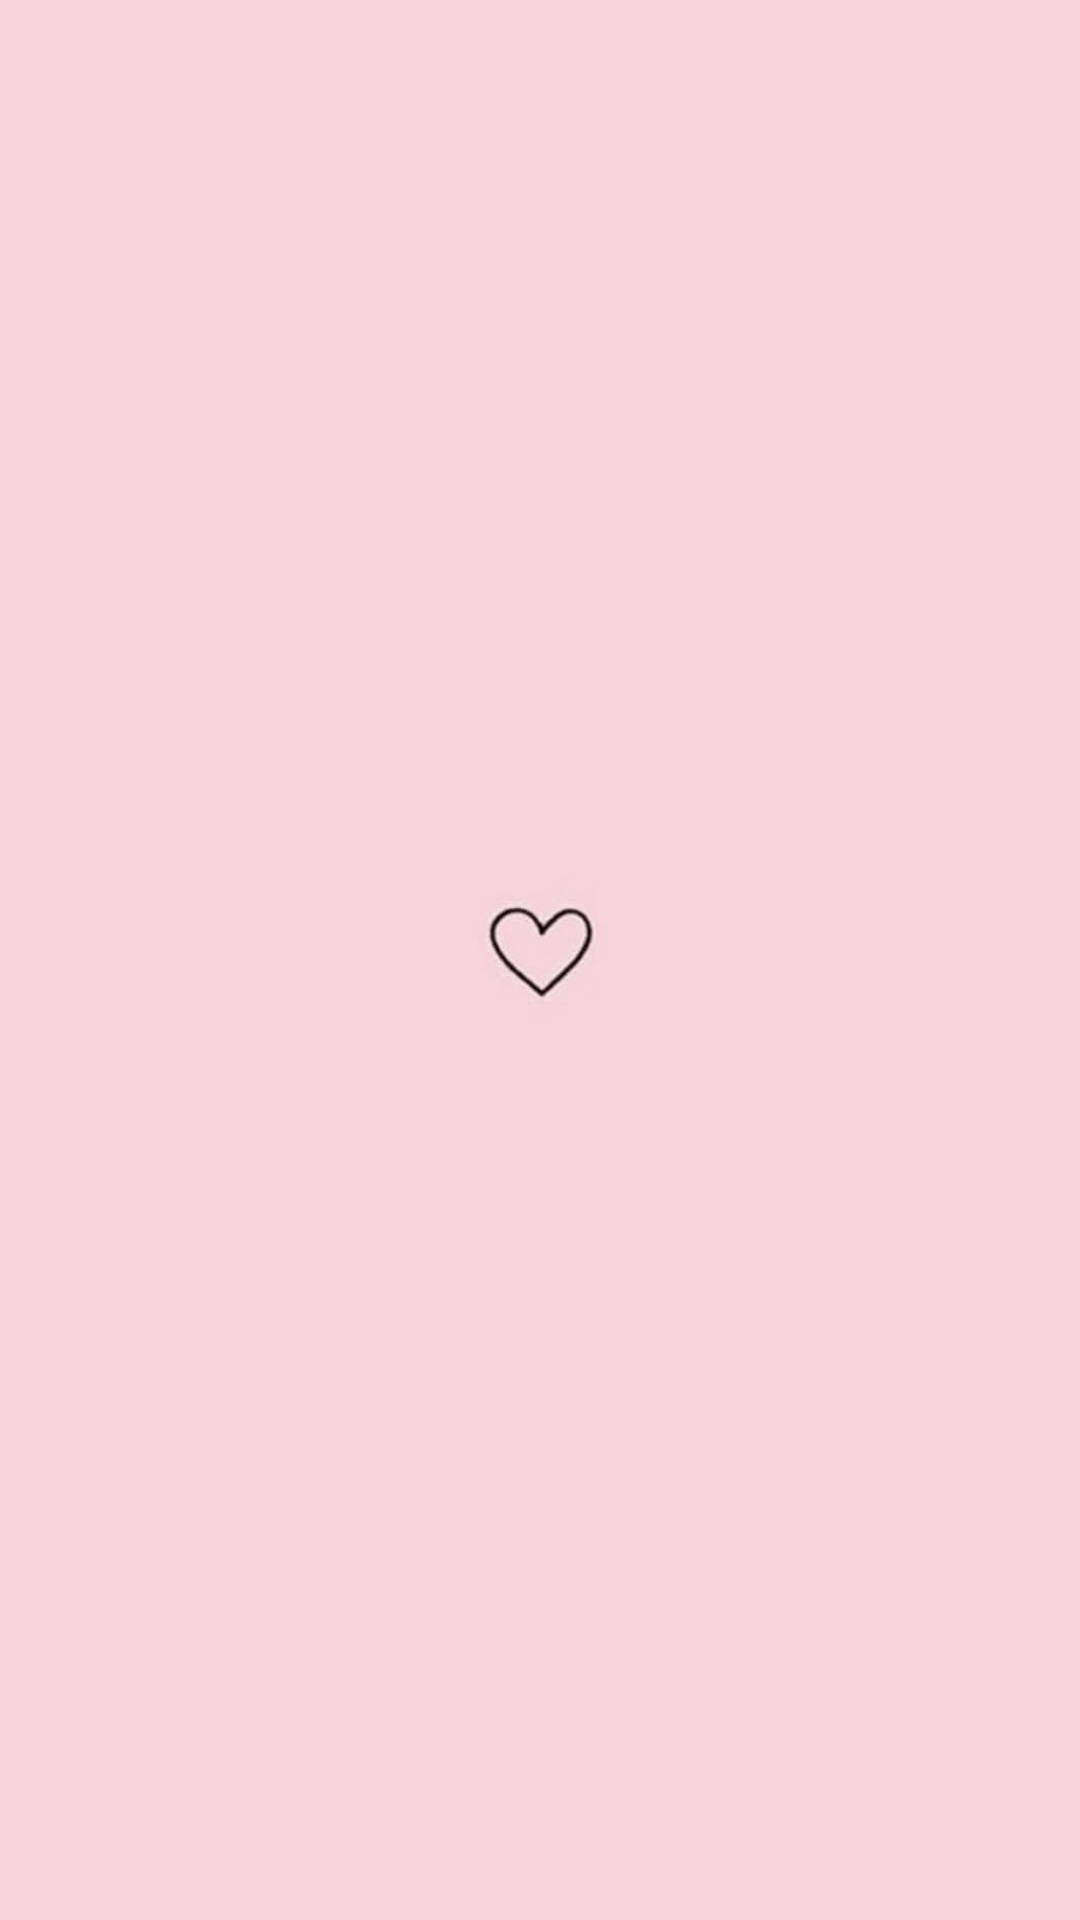 Simple Pink Aesthetic Heart